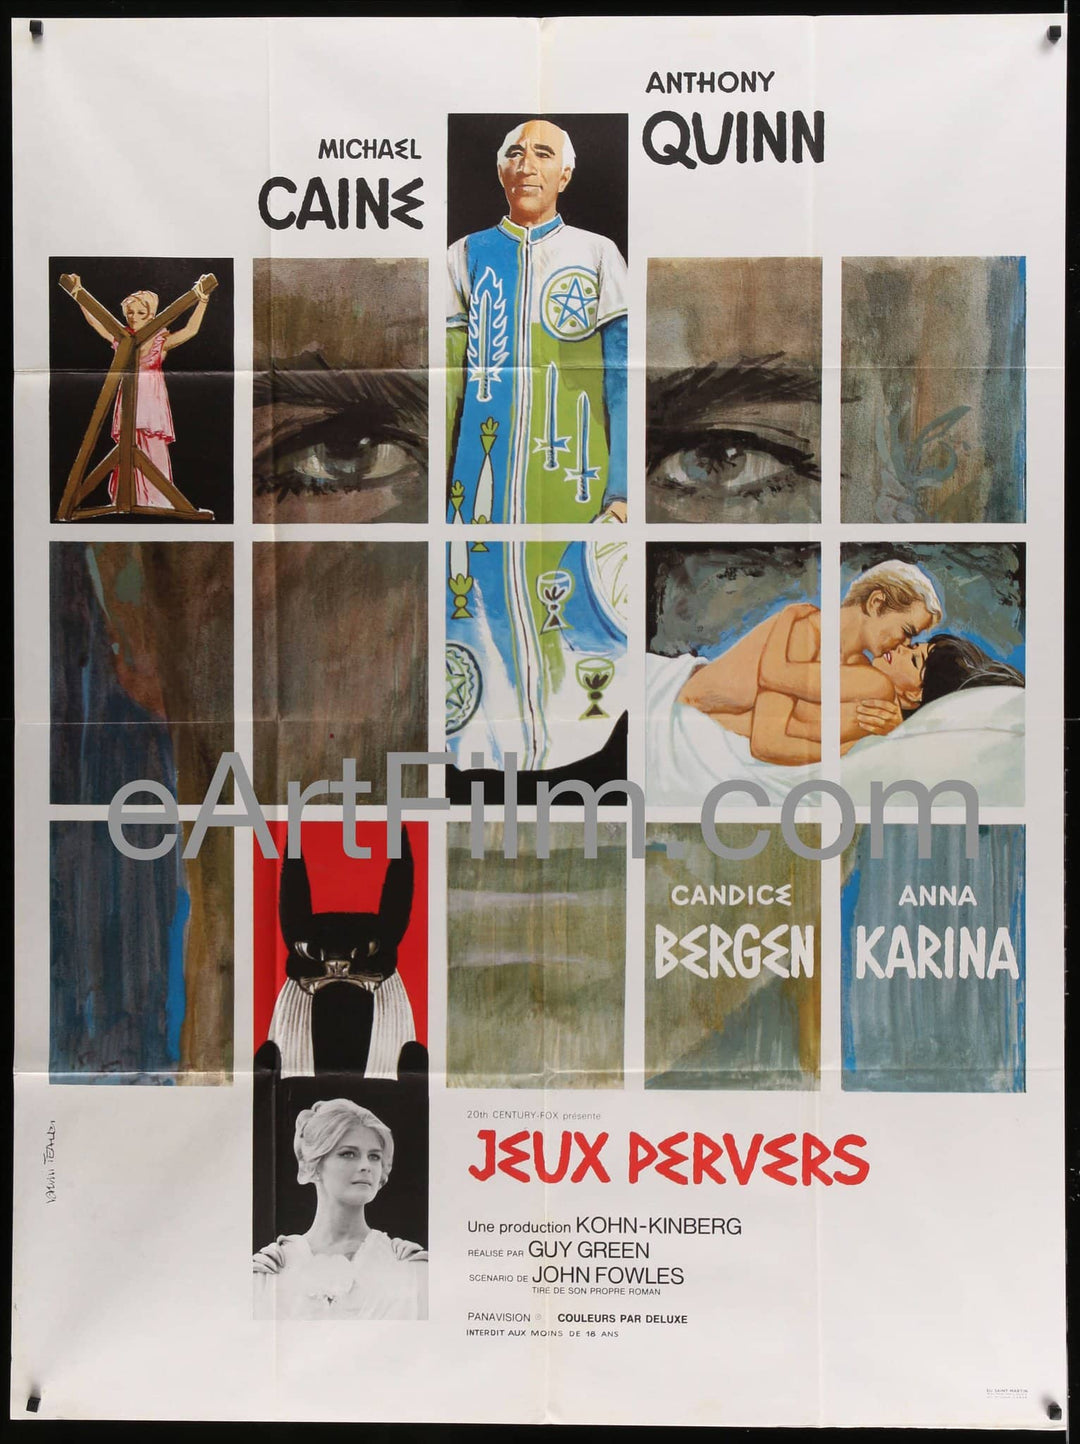 eArtFilm.com French 1 Panel Grande (47"x63") Magus, The 1969 47x63 French 1Panel Grande-Michael Caine-Candice Bergen